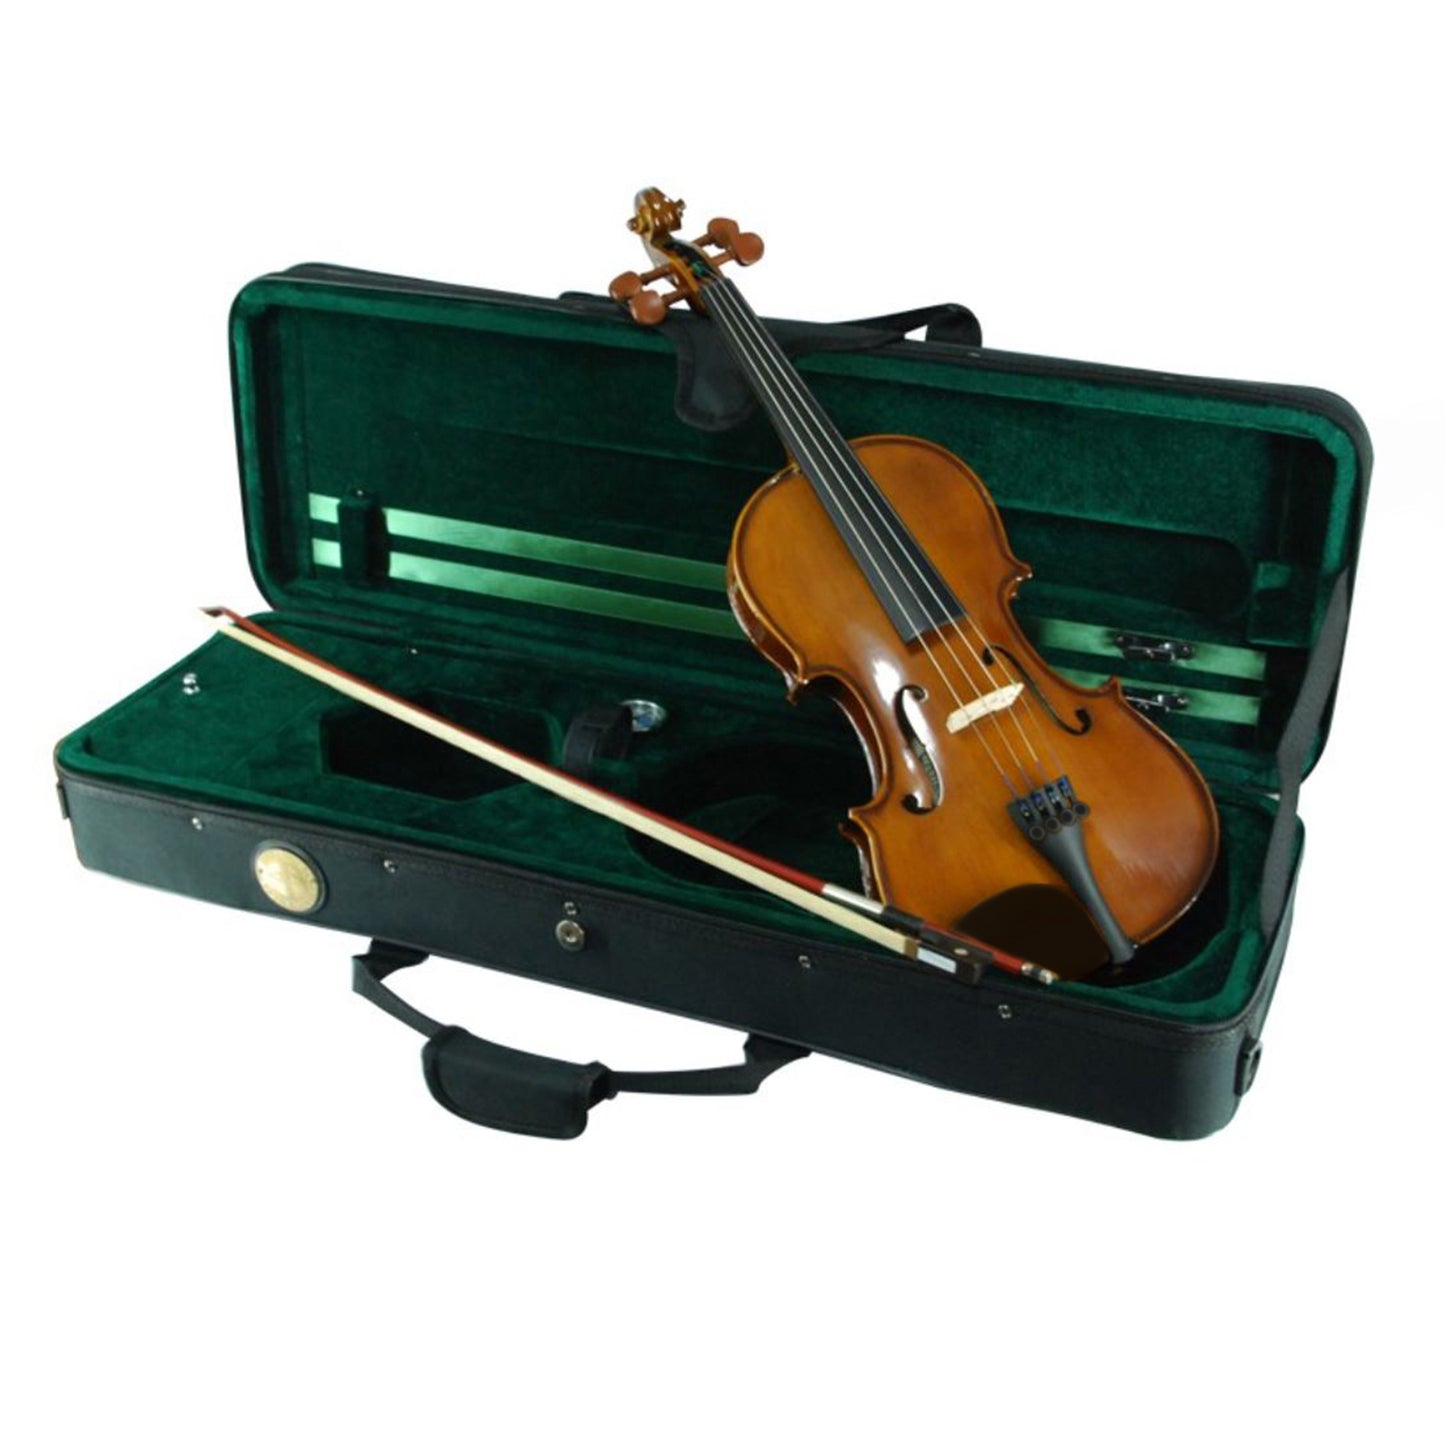 Hofner AS-060-V Acoustic Violin Outfit 4/4 Set Kit with Bow and Hard Case for Professional and Student Musicians, Intermediate Players